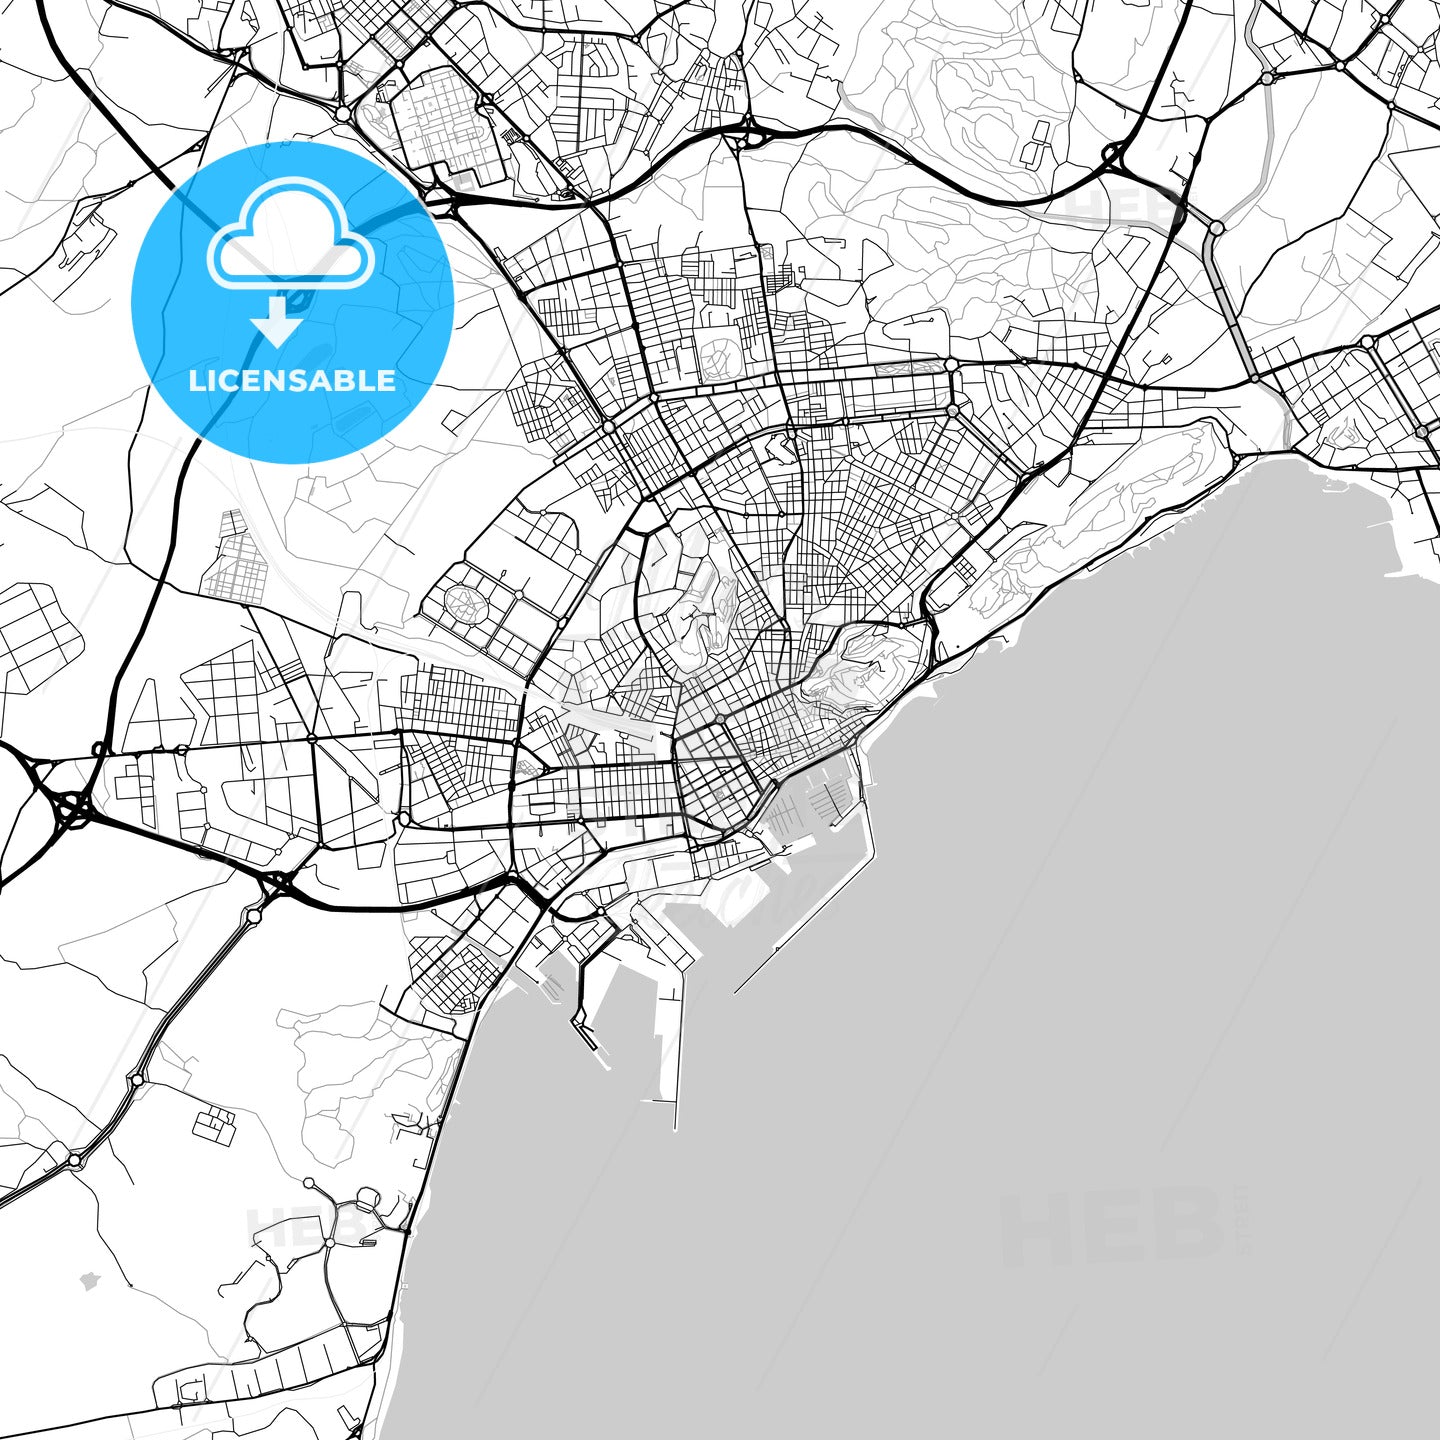 Alicante, Spain - downtown map, light